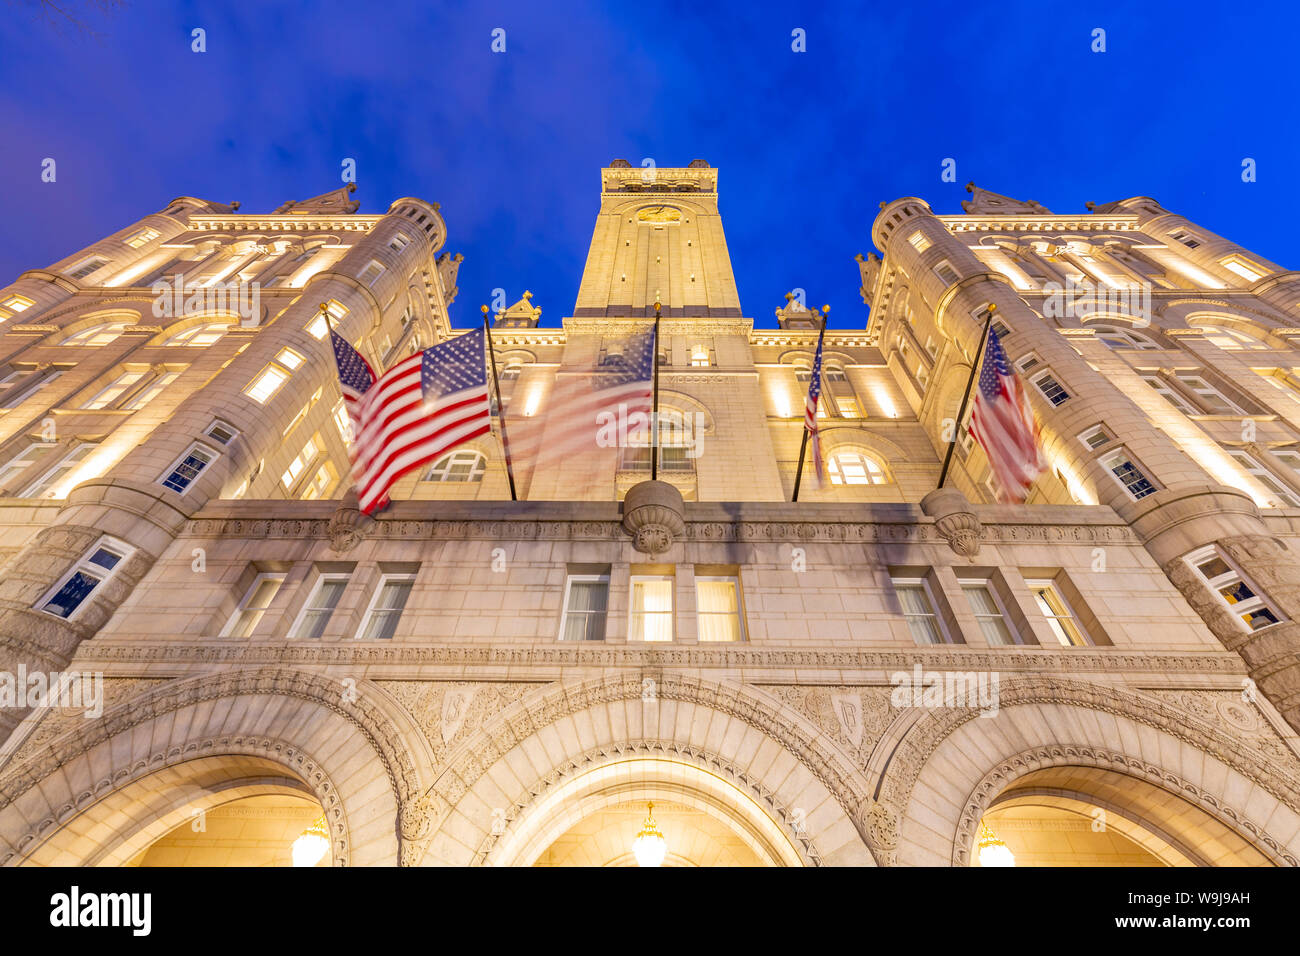 View of US flags in front of former Old Post Office Pavilion at dusk, Washington DC, District of Columbia, United States of America Stock Photo